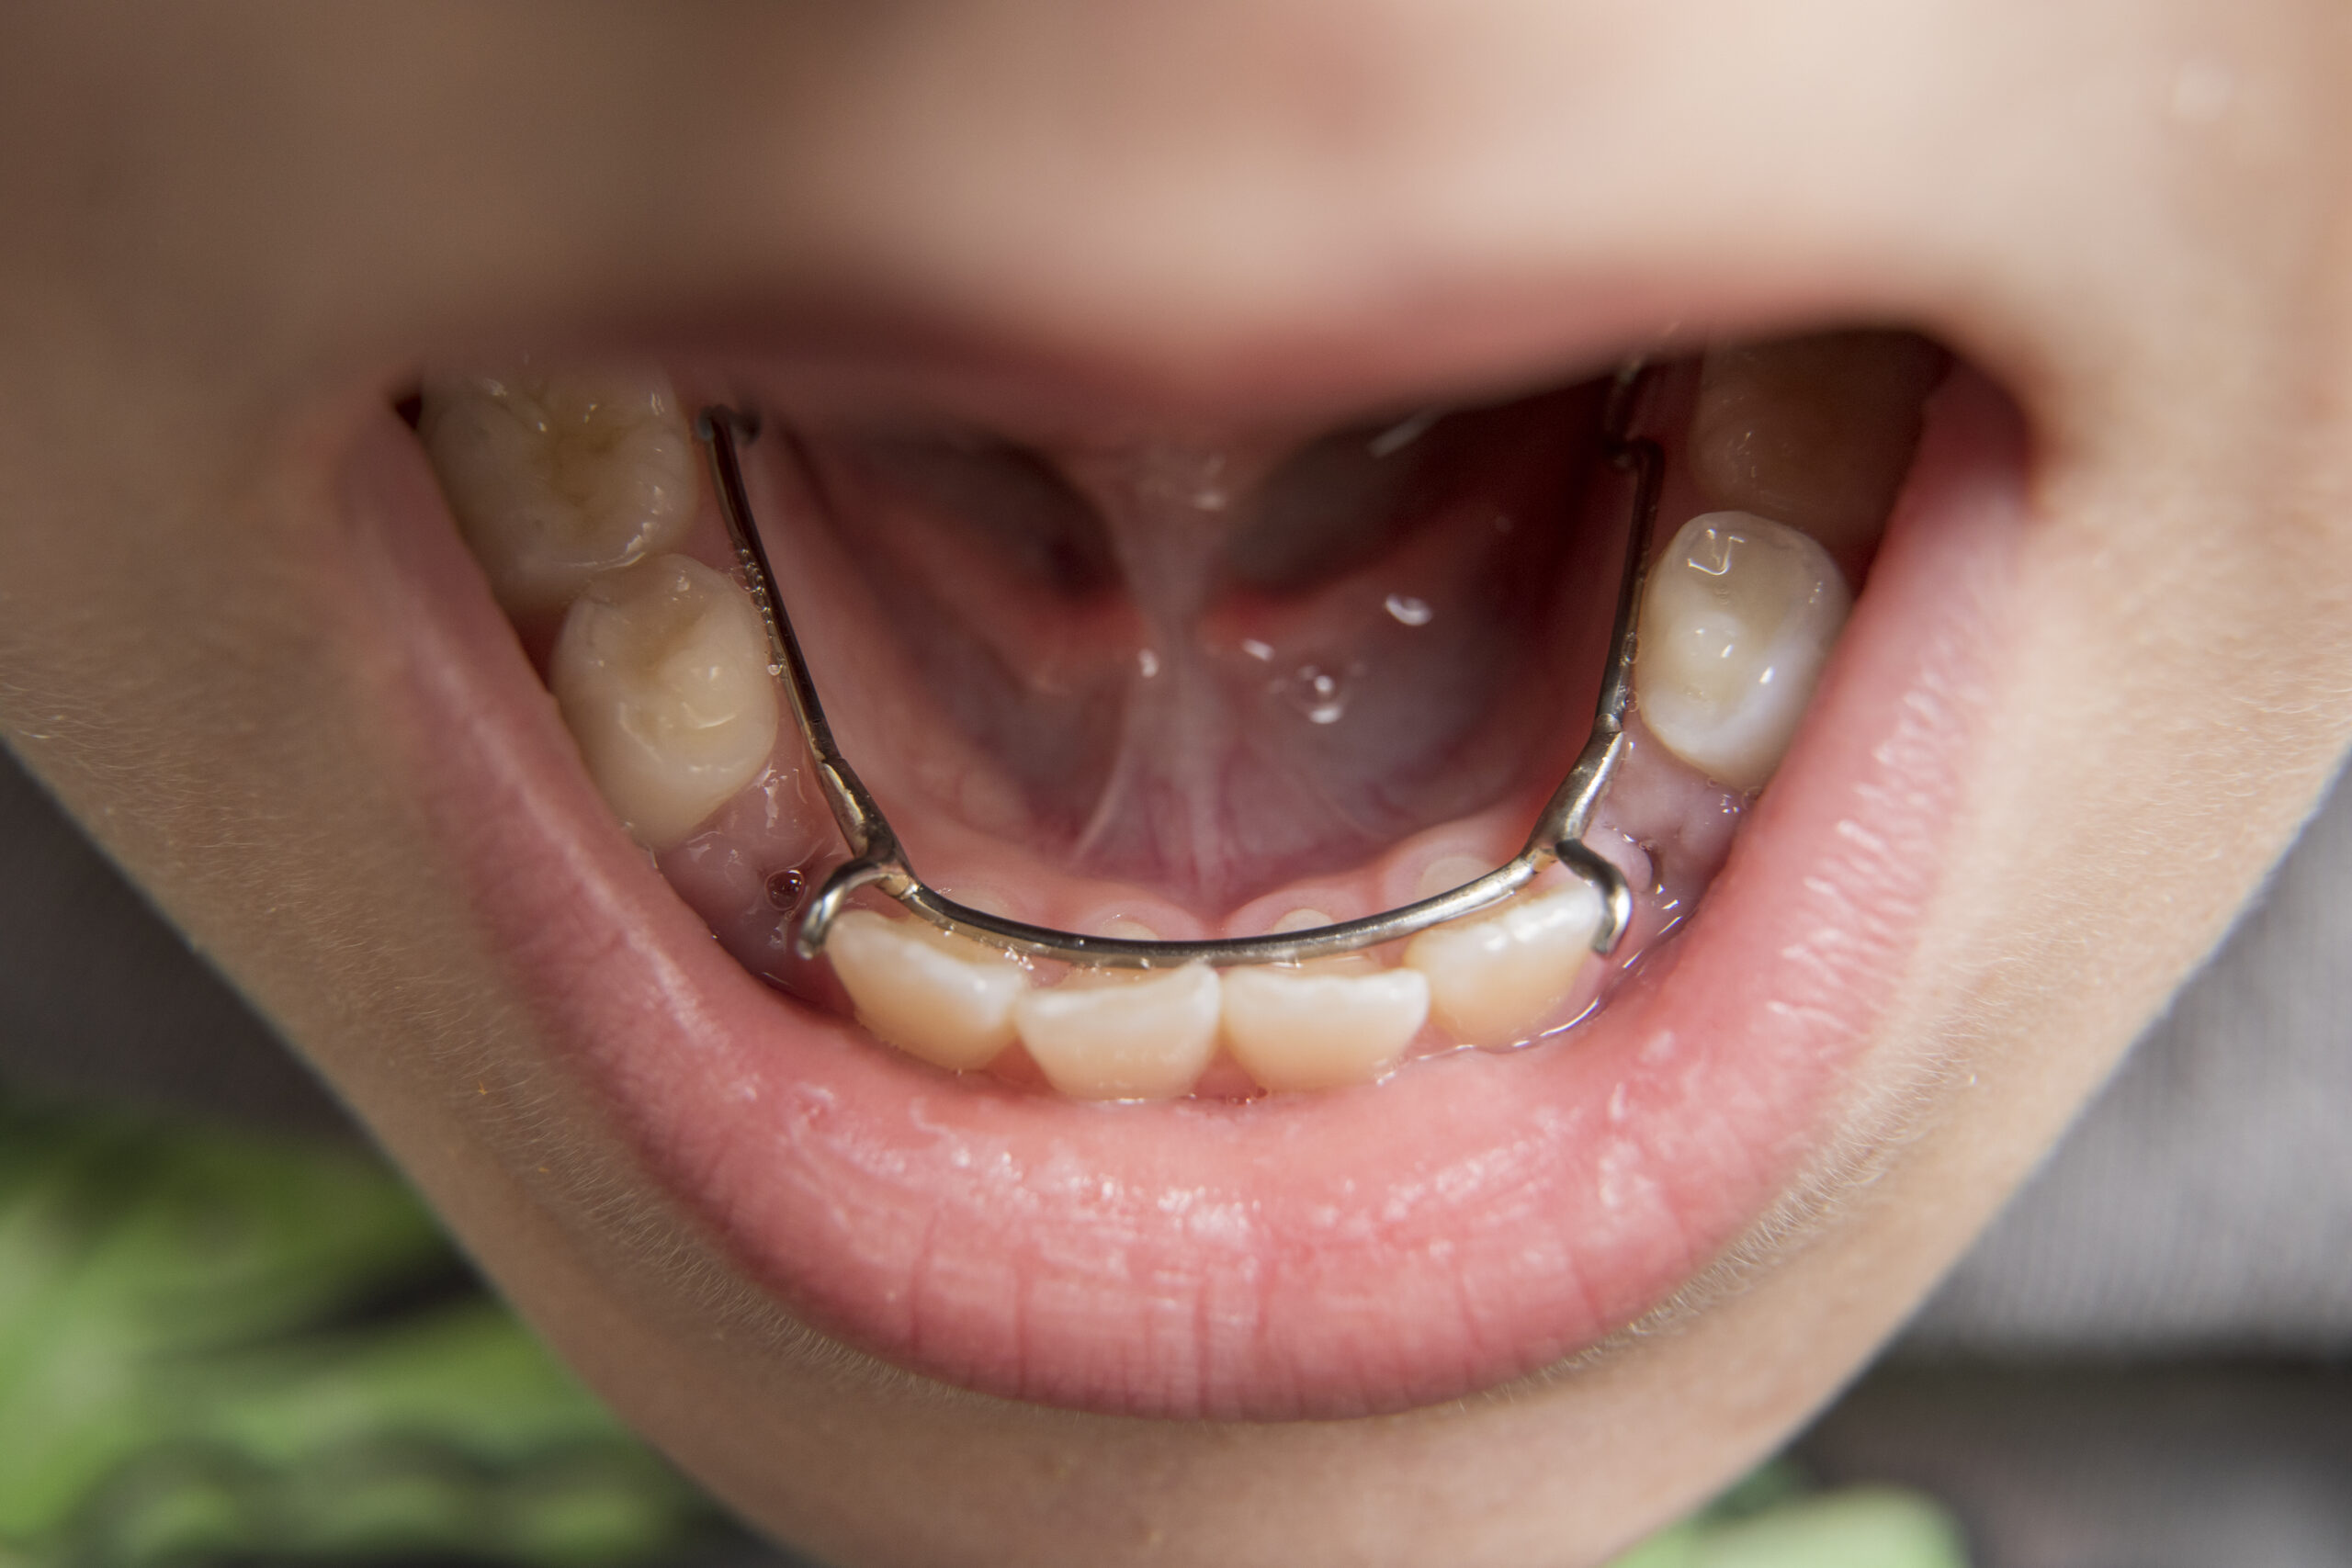 Complex Orthodontics Case with Braces by a Pediatric Dentist.